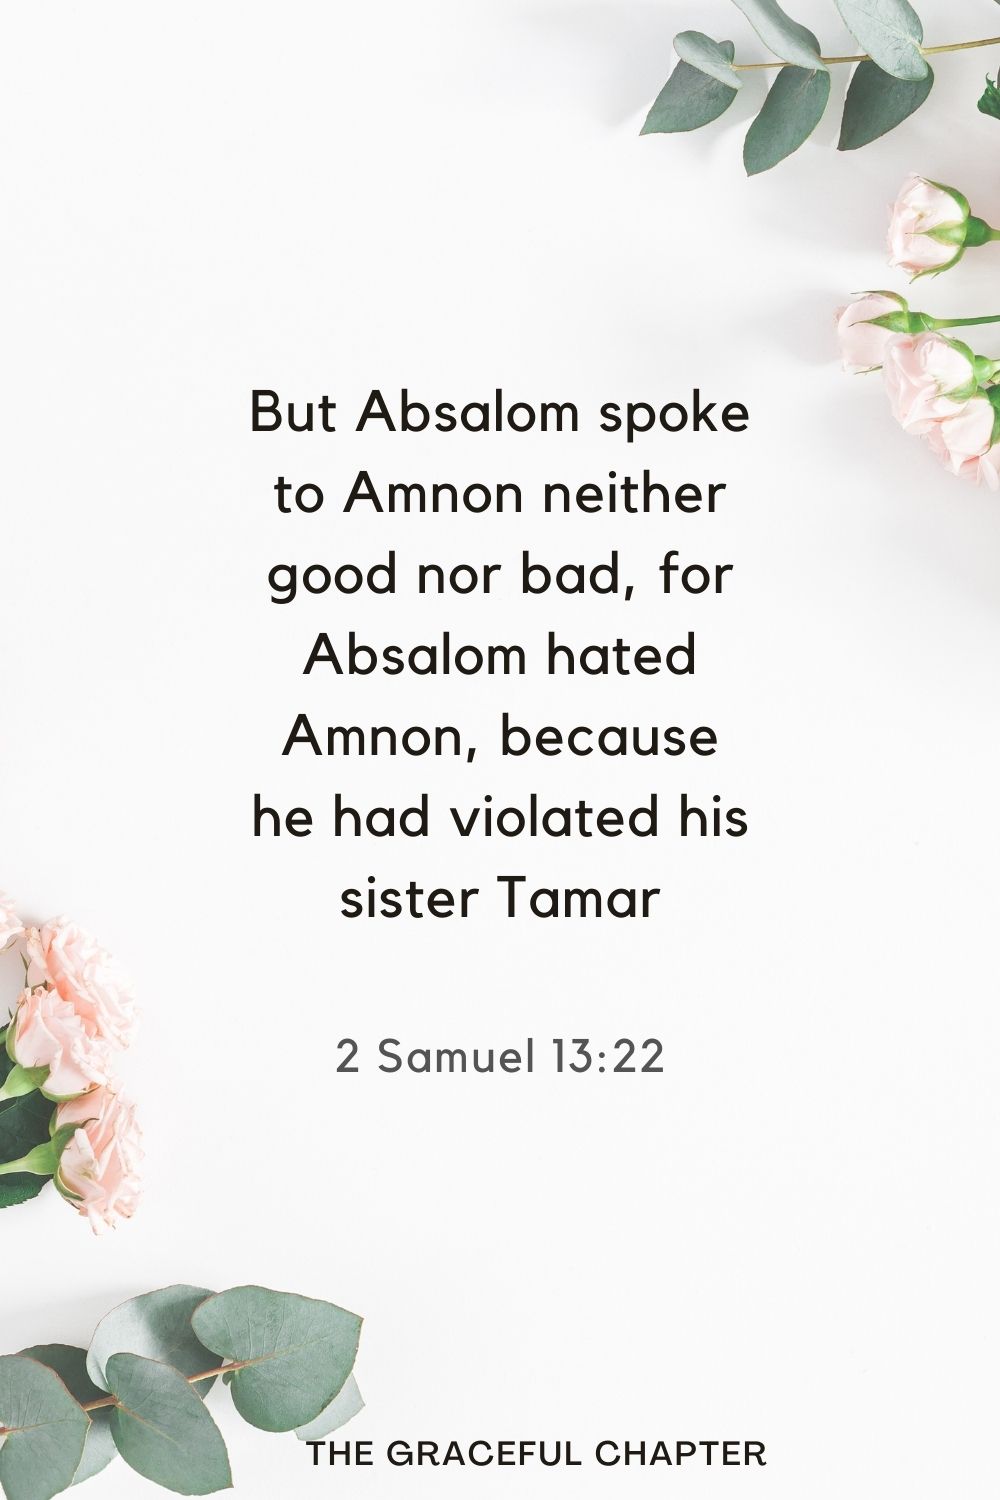 But Absalom spoke to Amnon neither good nor bad, for Absalom hated Amnon, because he had violated his sister Tamar. 2 Samuel 13:22